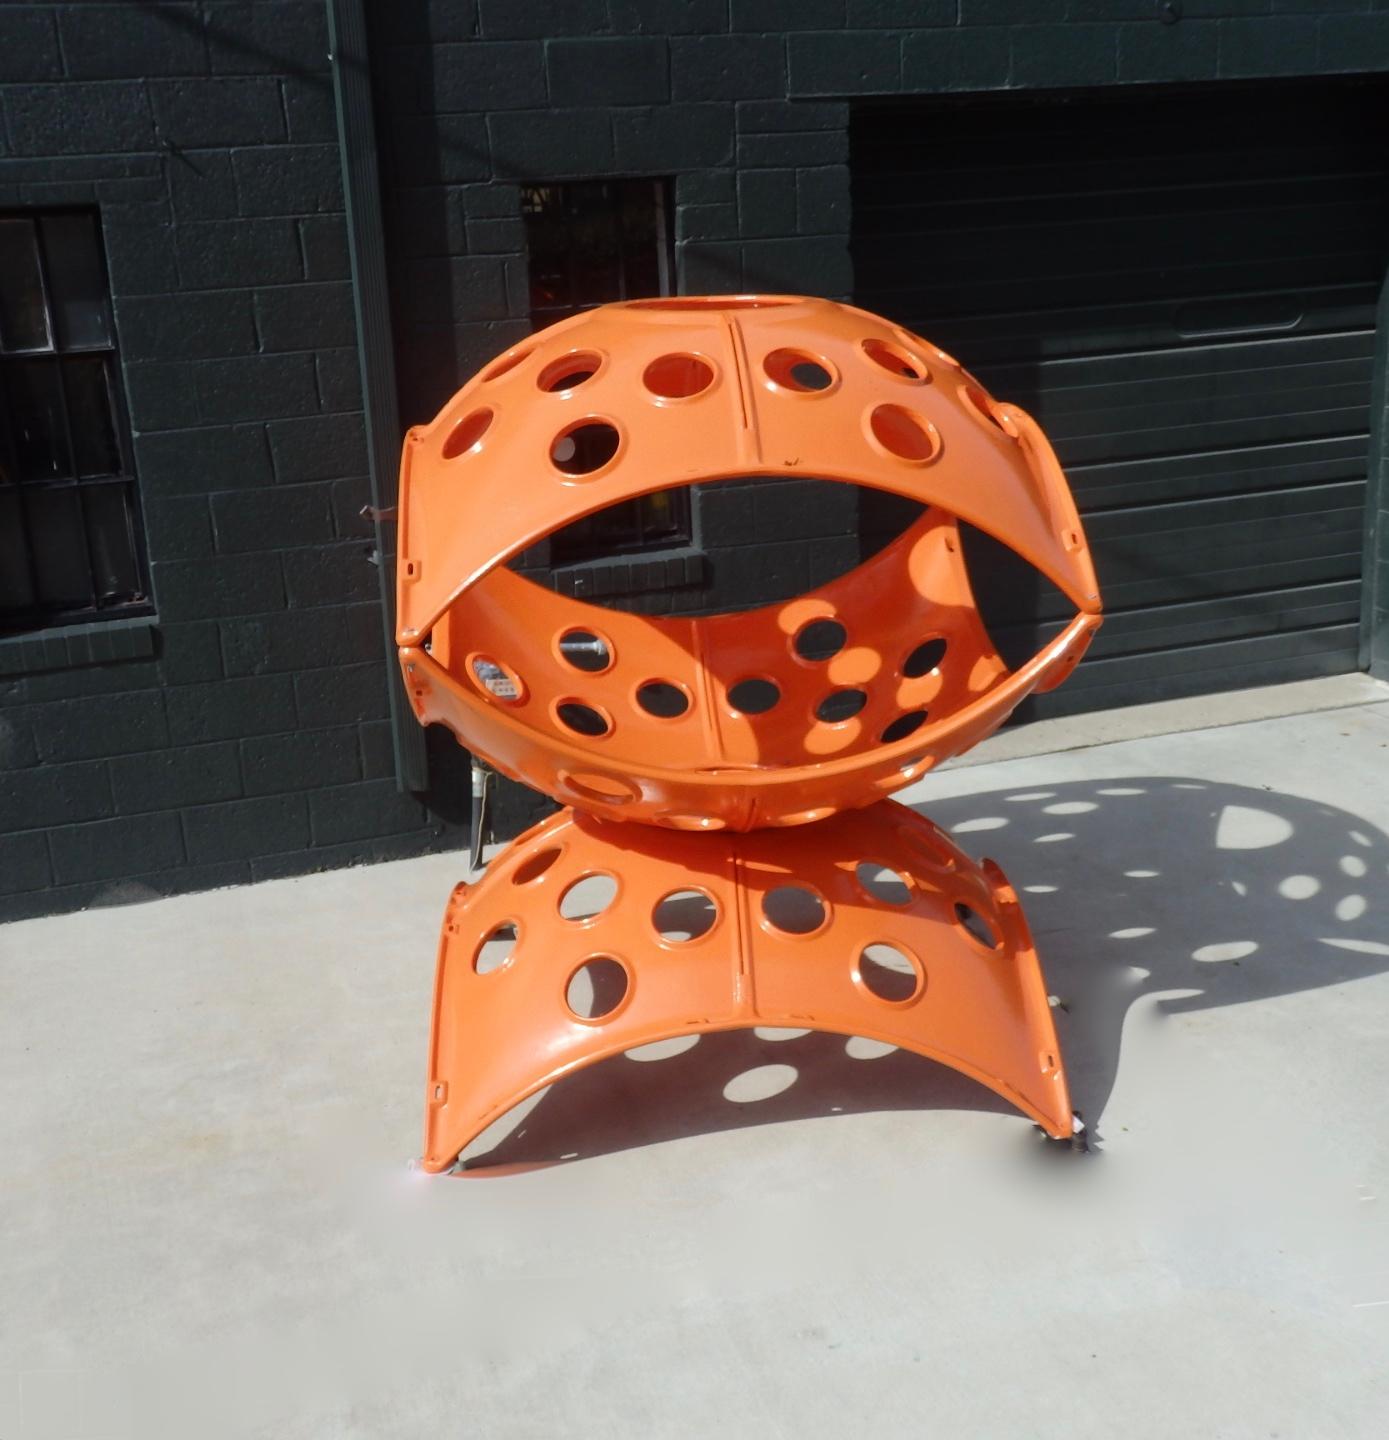 Modular in that this is three pieces of cast aluminum. Each has been sand blasted and powder coated. Measures 75